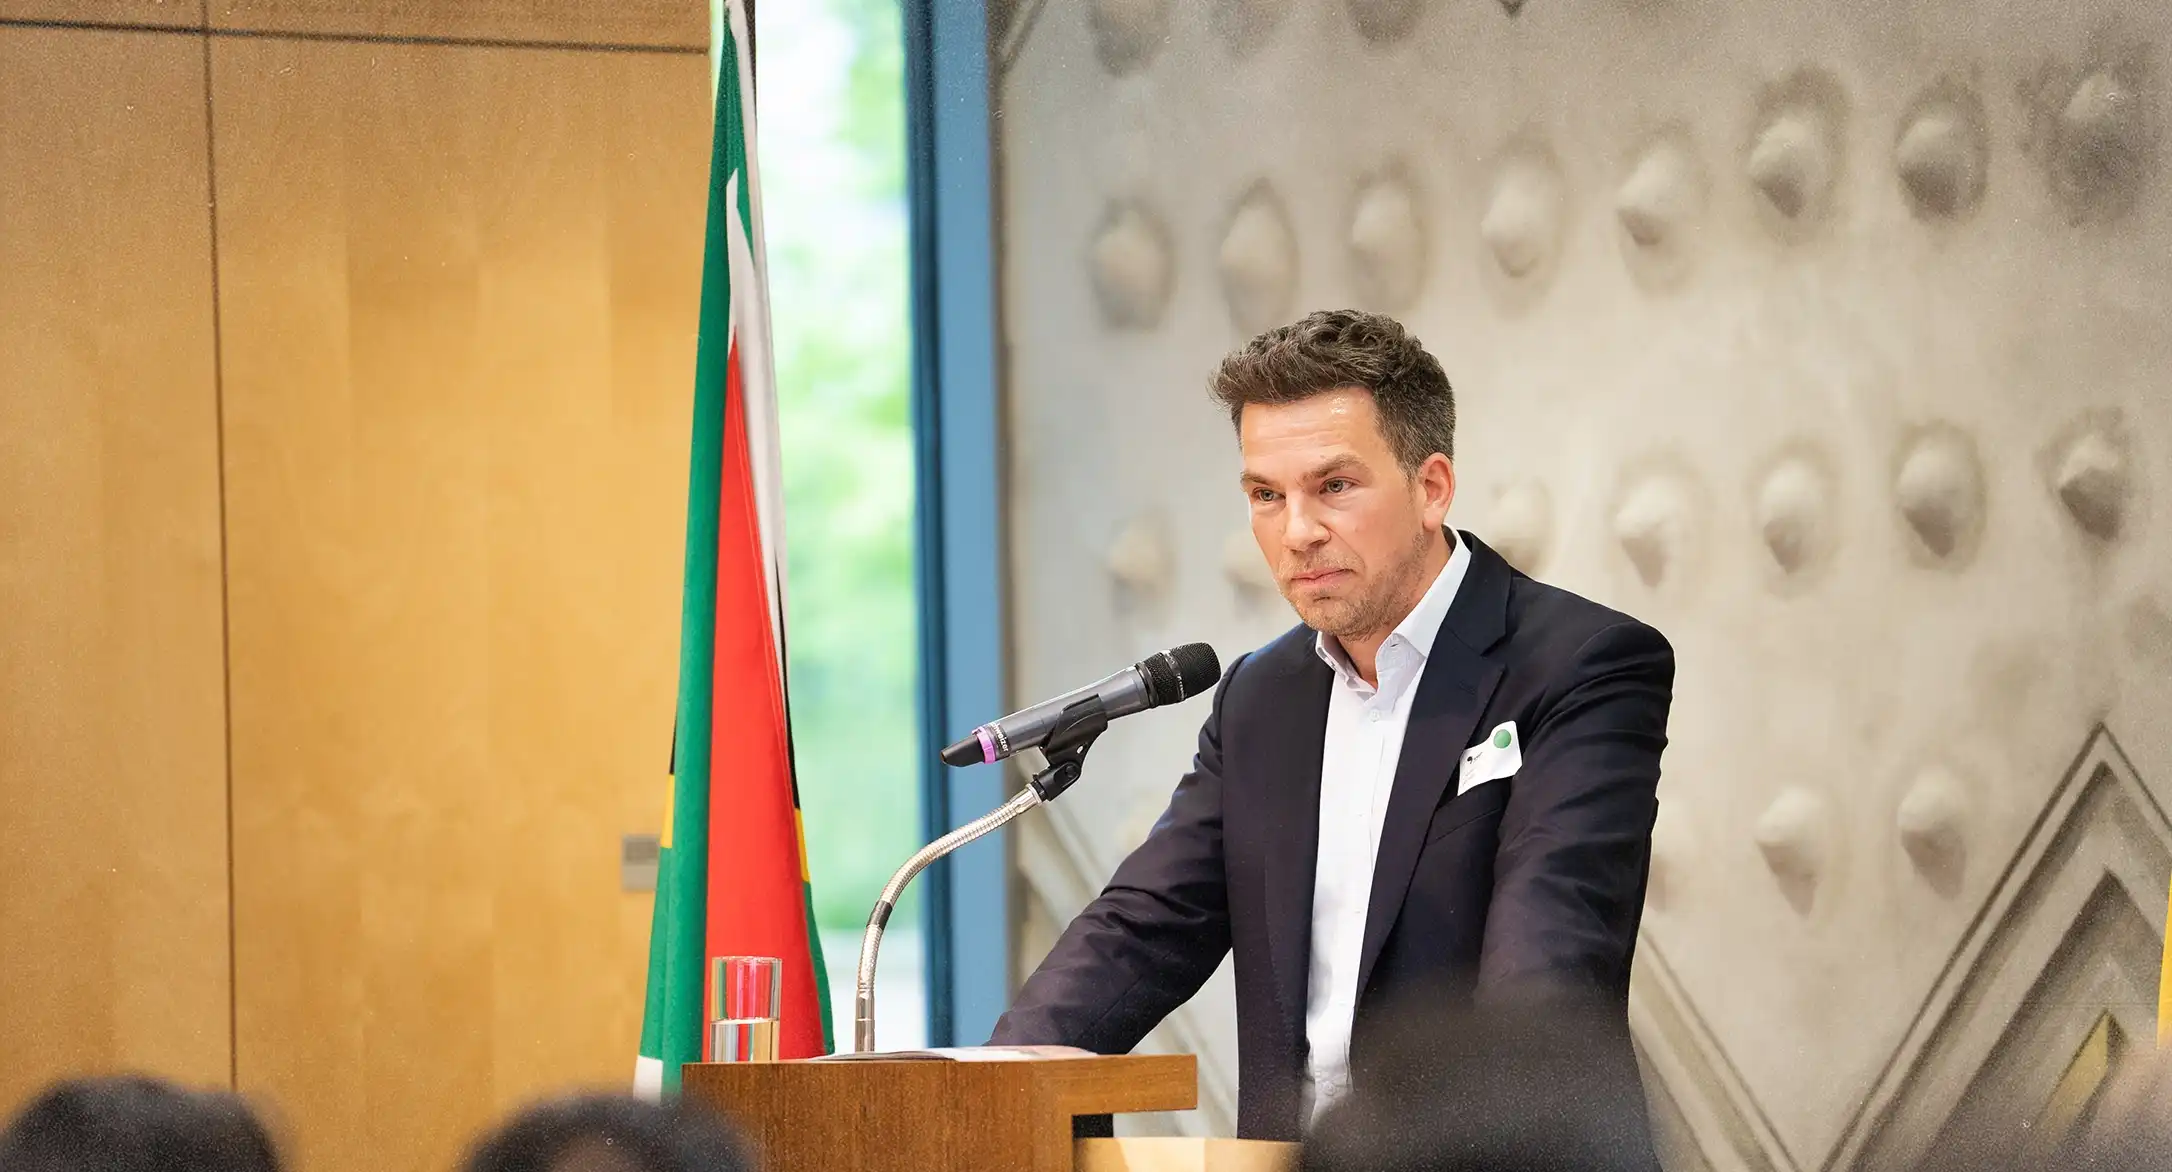 Simon Brunke holding a speech on a podium in the South African Embassy